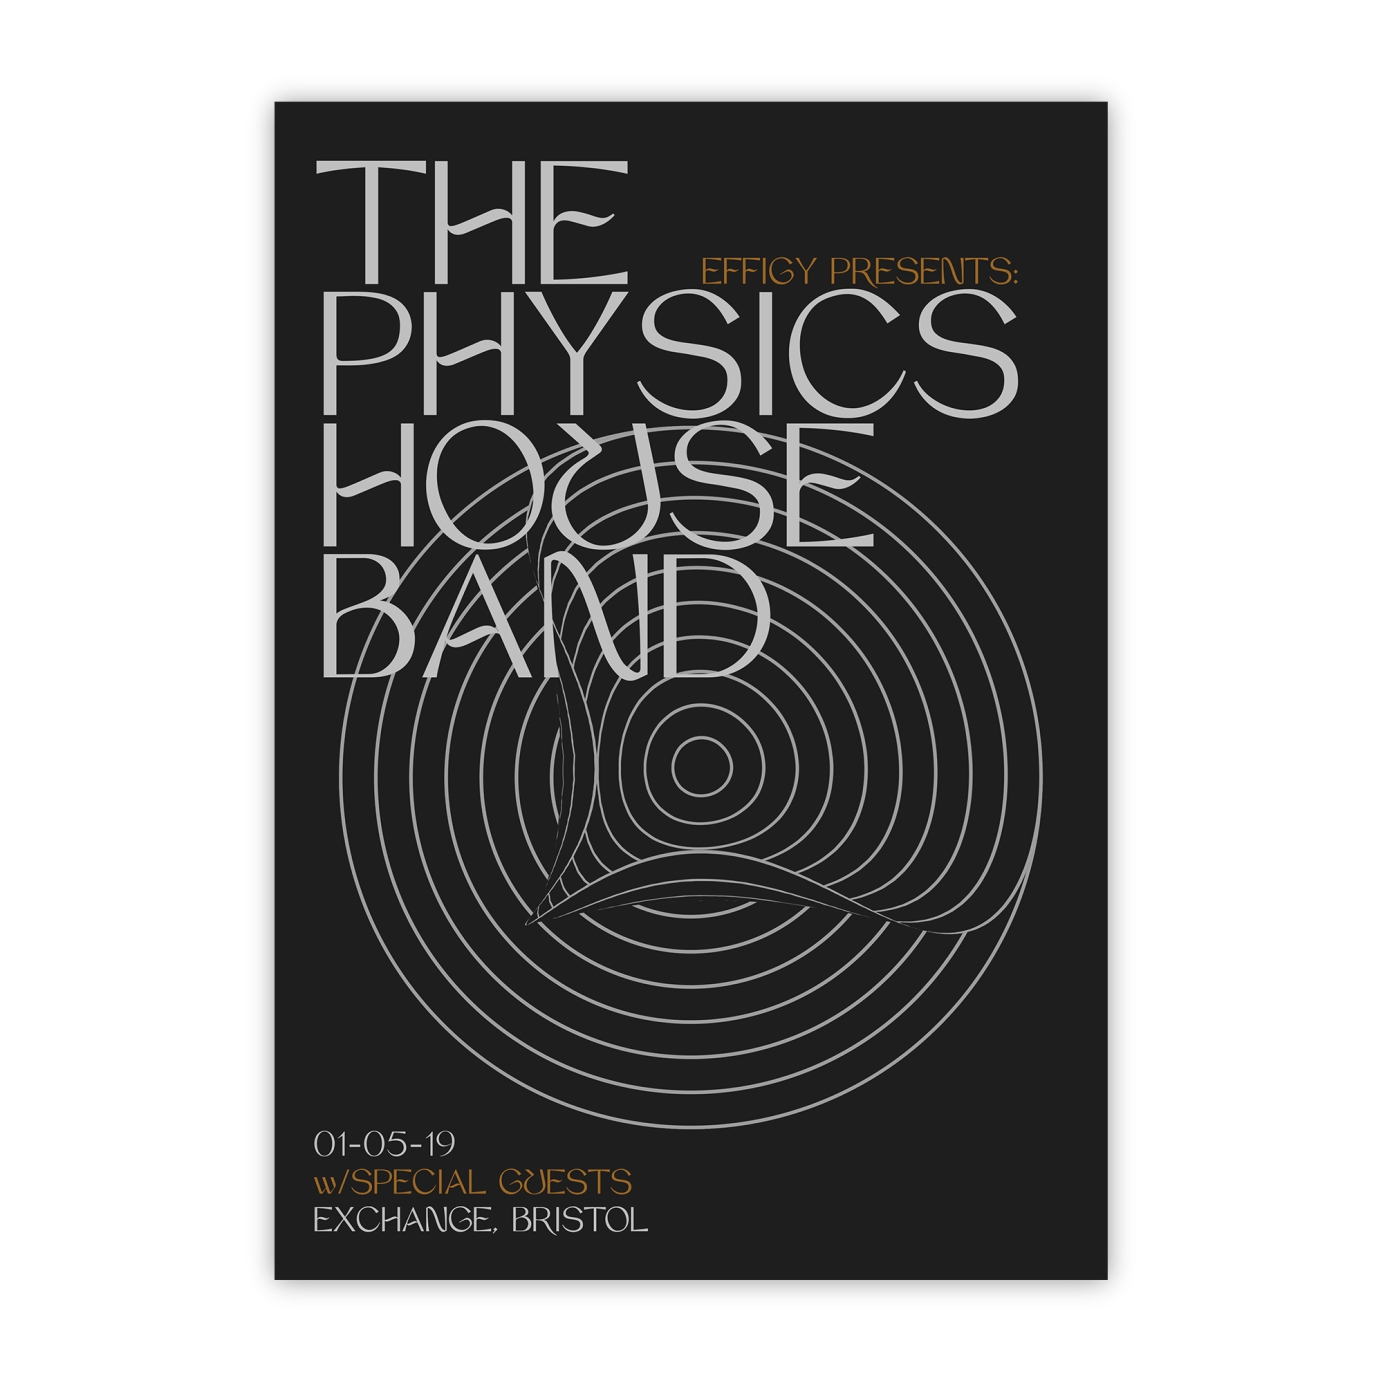 Artwork for The Physics House Band by Jack Hardwicke